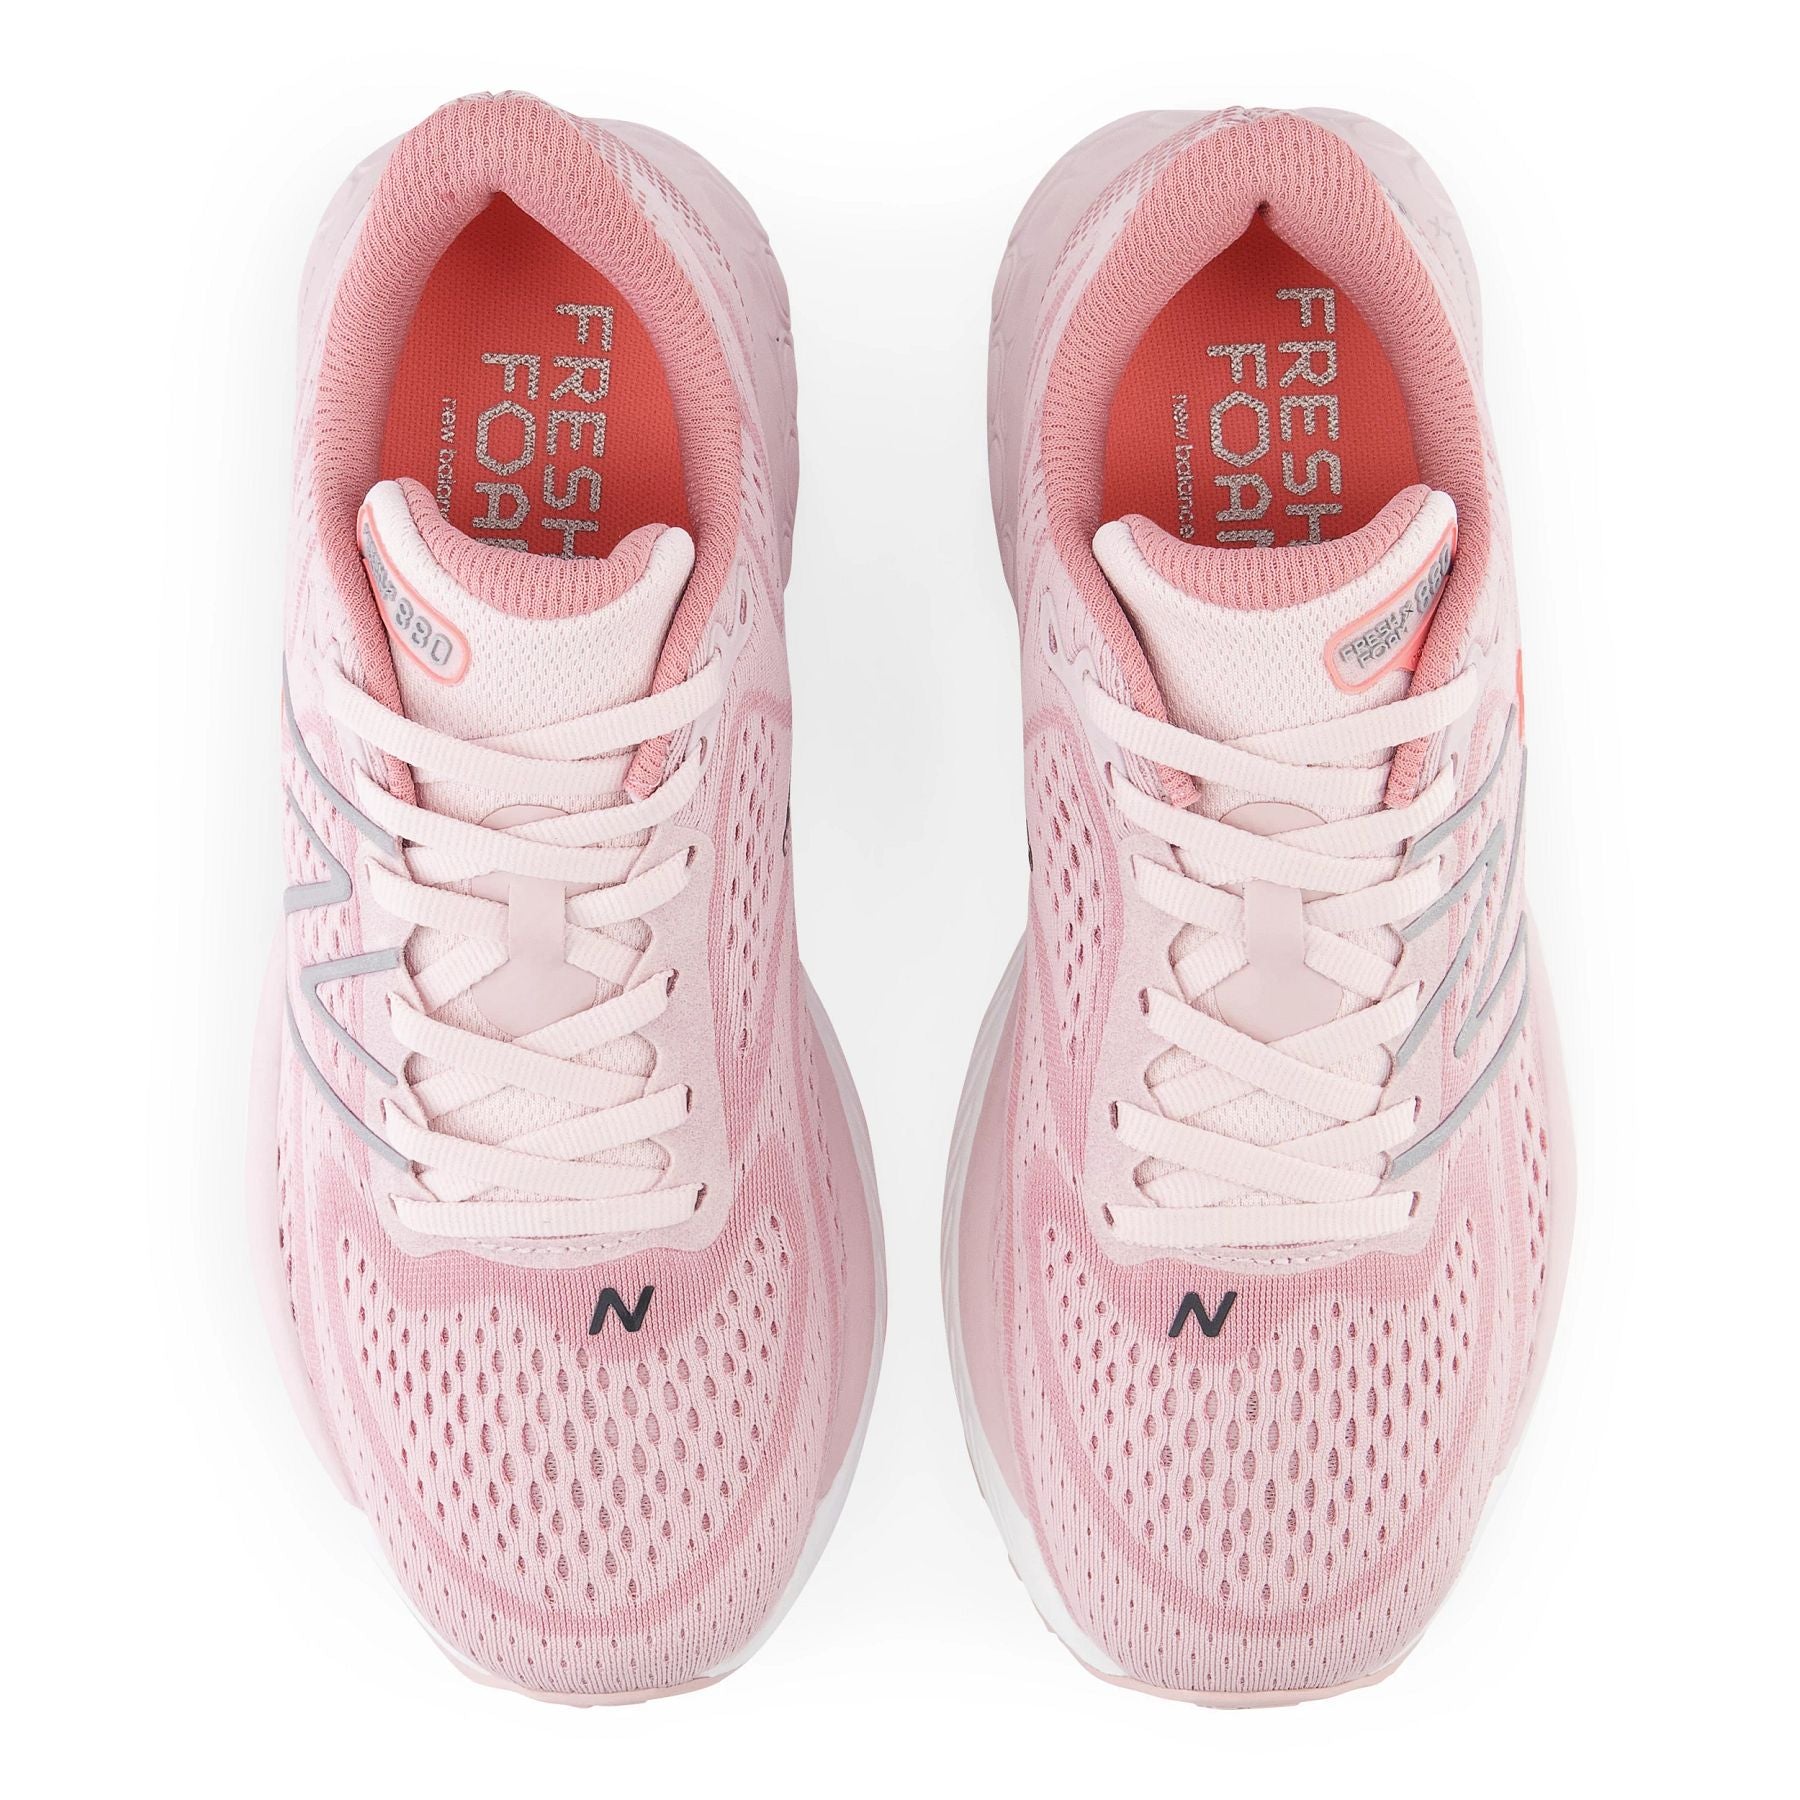 Top view of the Women's New Balance 880 V13 in the color Stone Pink